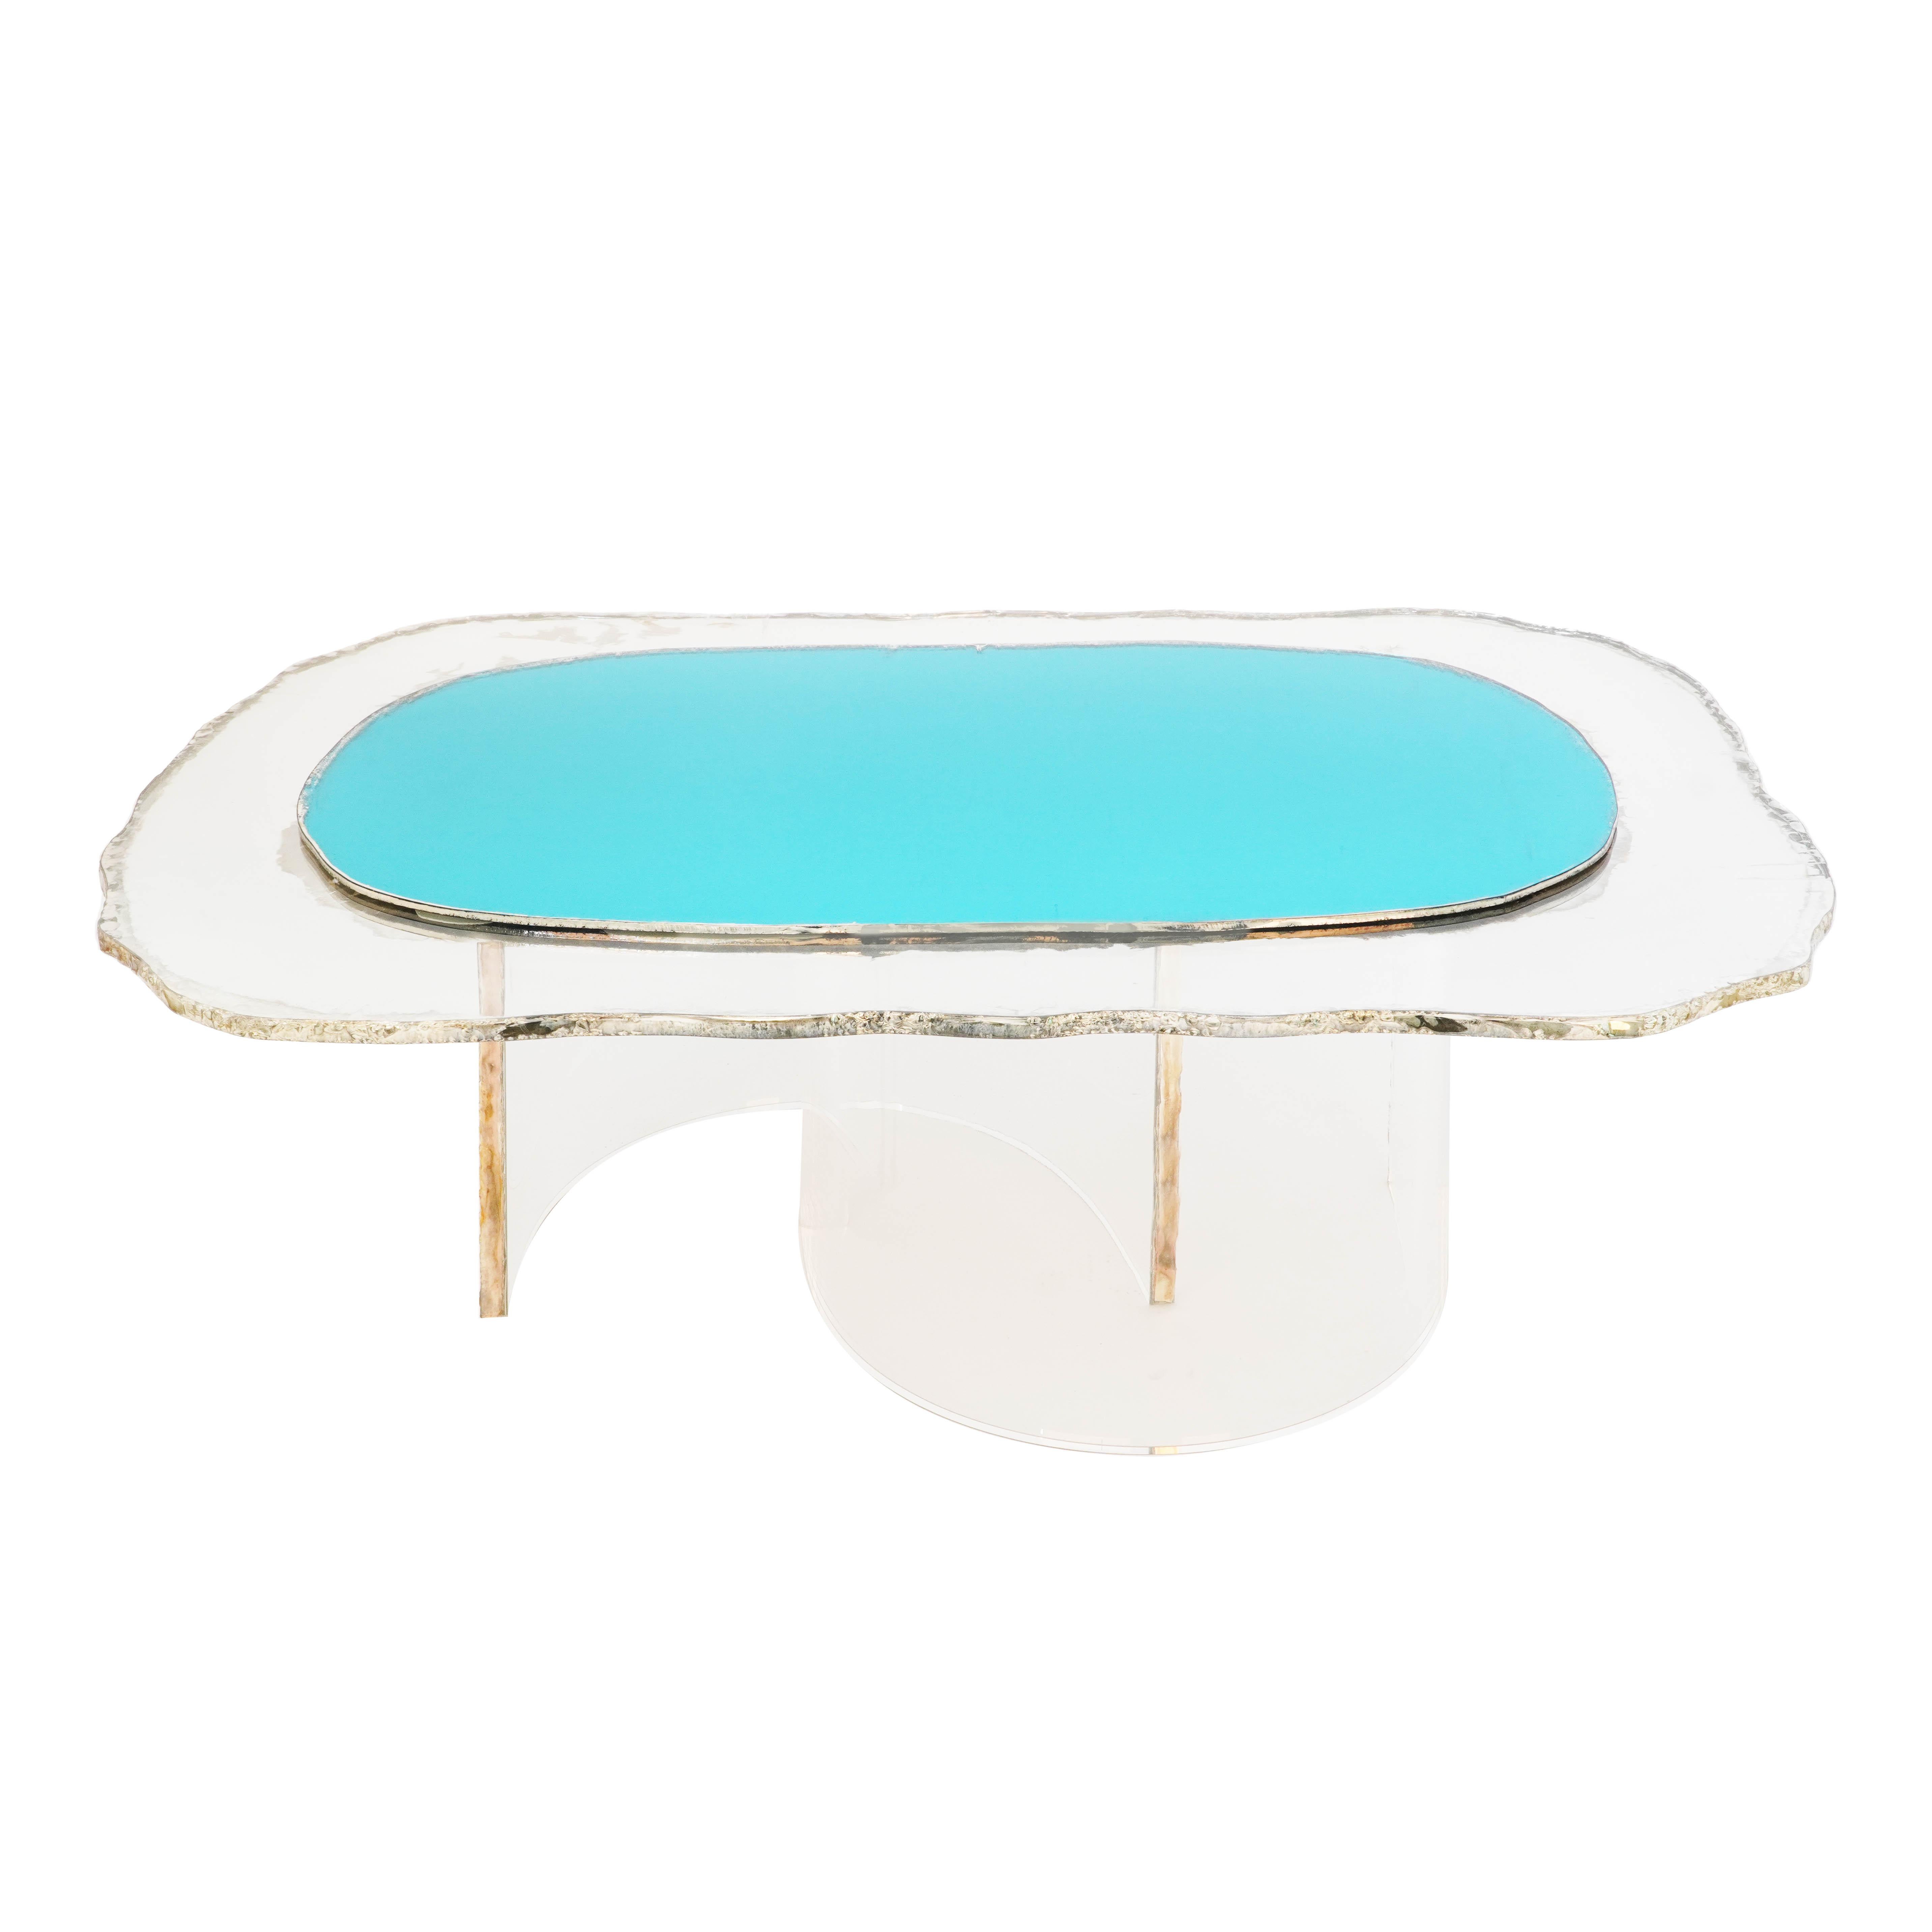 GEM   coffee  - dining  tables

Combining contemporary modern style with details inspired by our glass tradition, Sabrina Landini GEM tables reinterpret our legendary links into head-turning design accents

The table, reminiscent of a gem hugged by